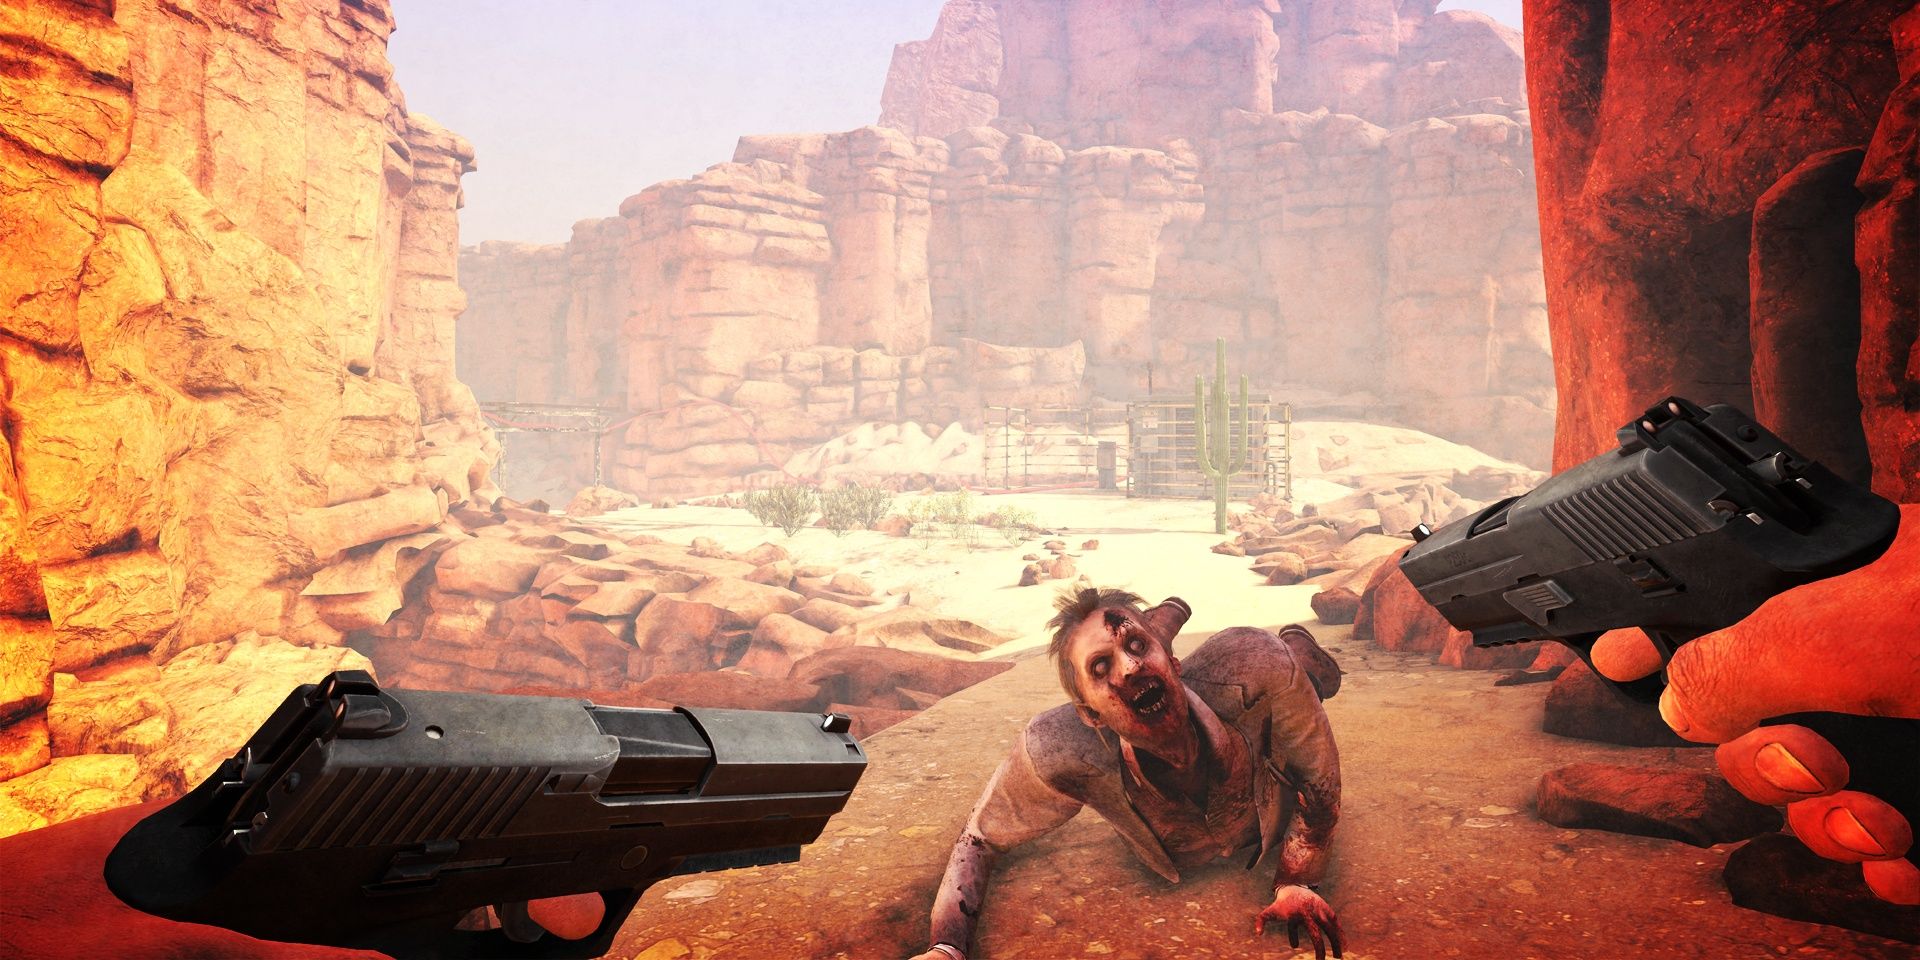 Arizona Sunshine Zombie crawling in a canyon while player dual wields pistols